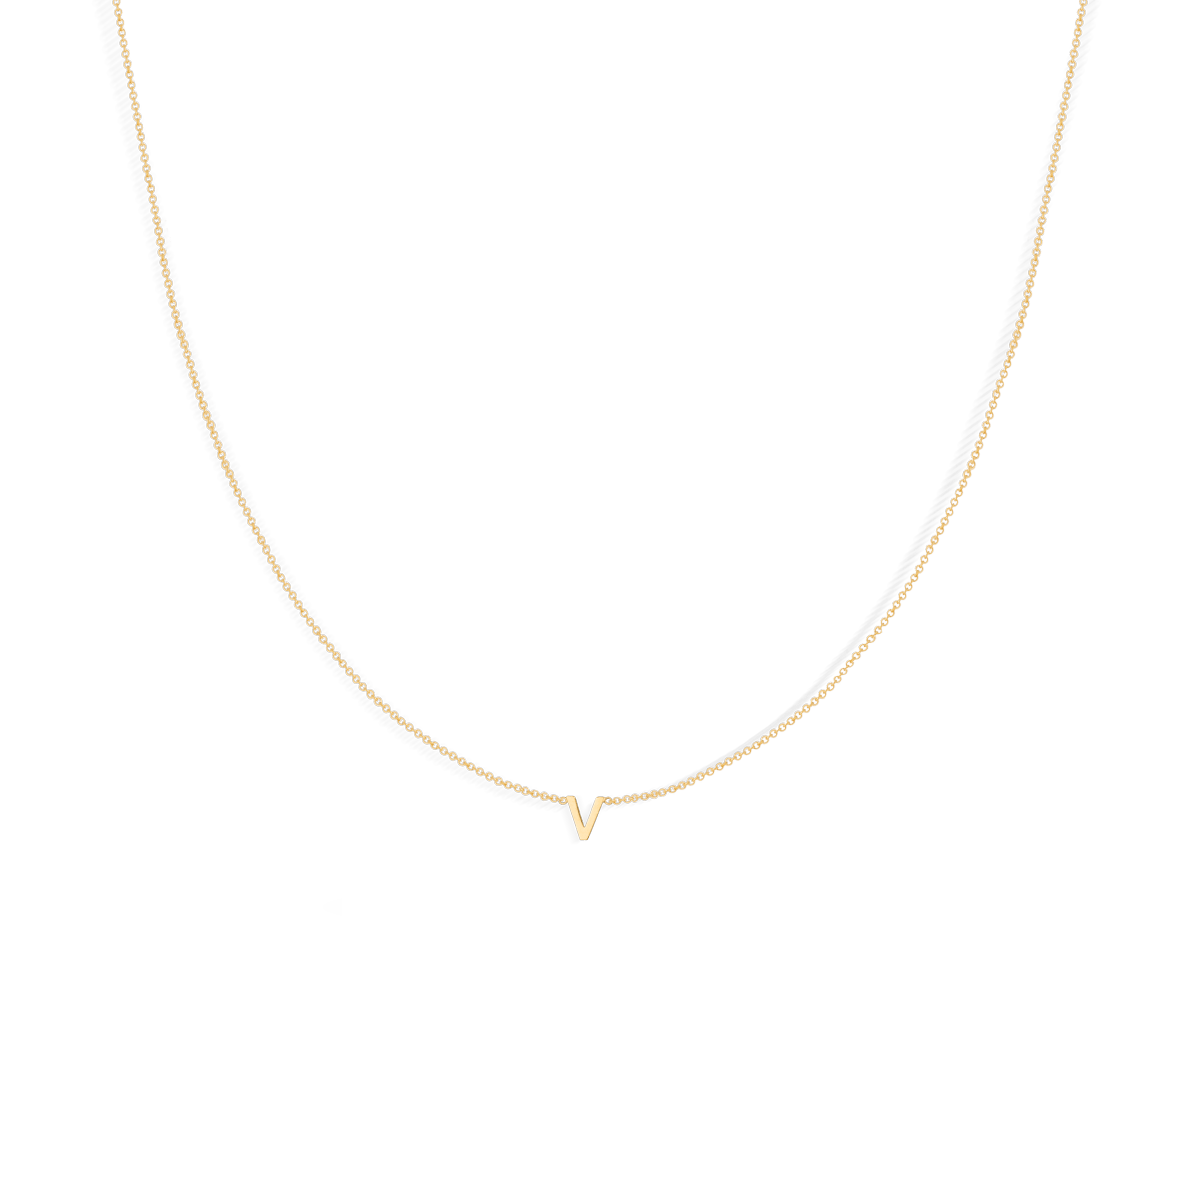 Vedder & Vedder Necklaces | Create a necklace with your personal touch ...